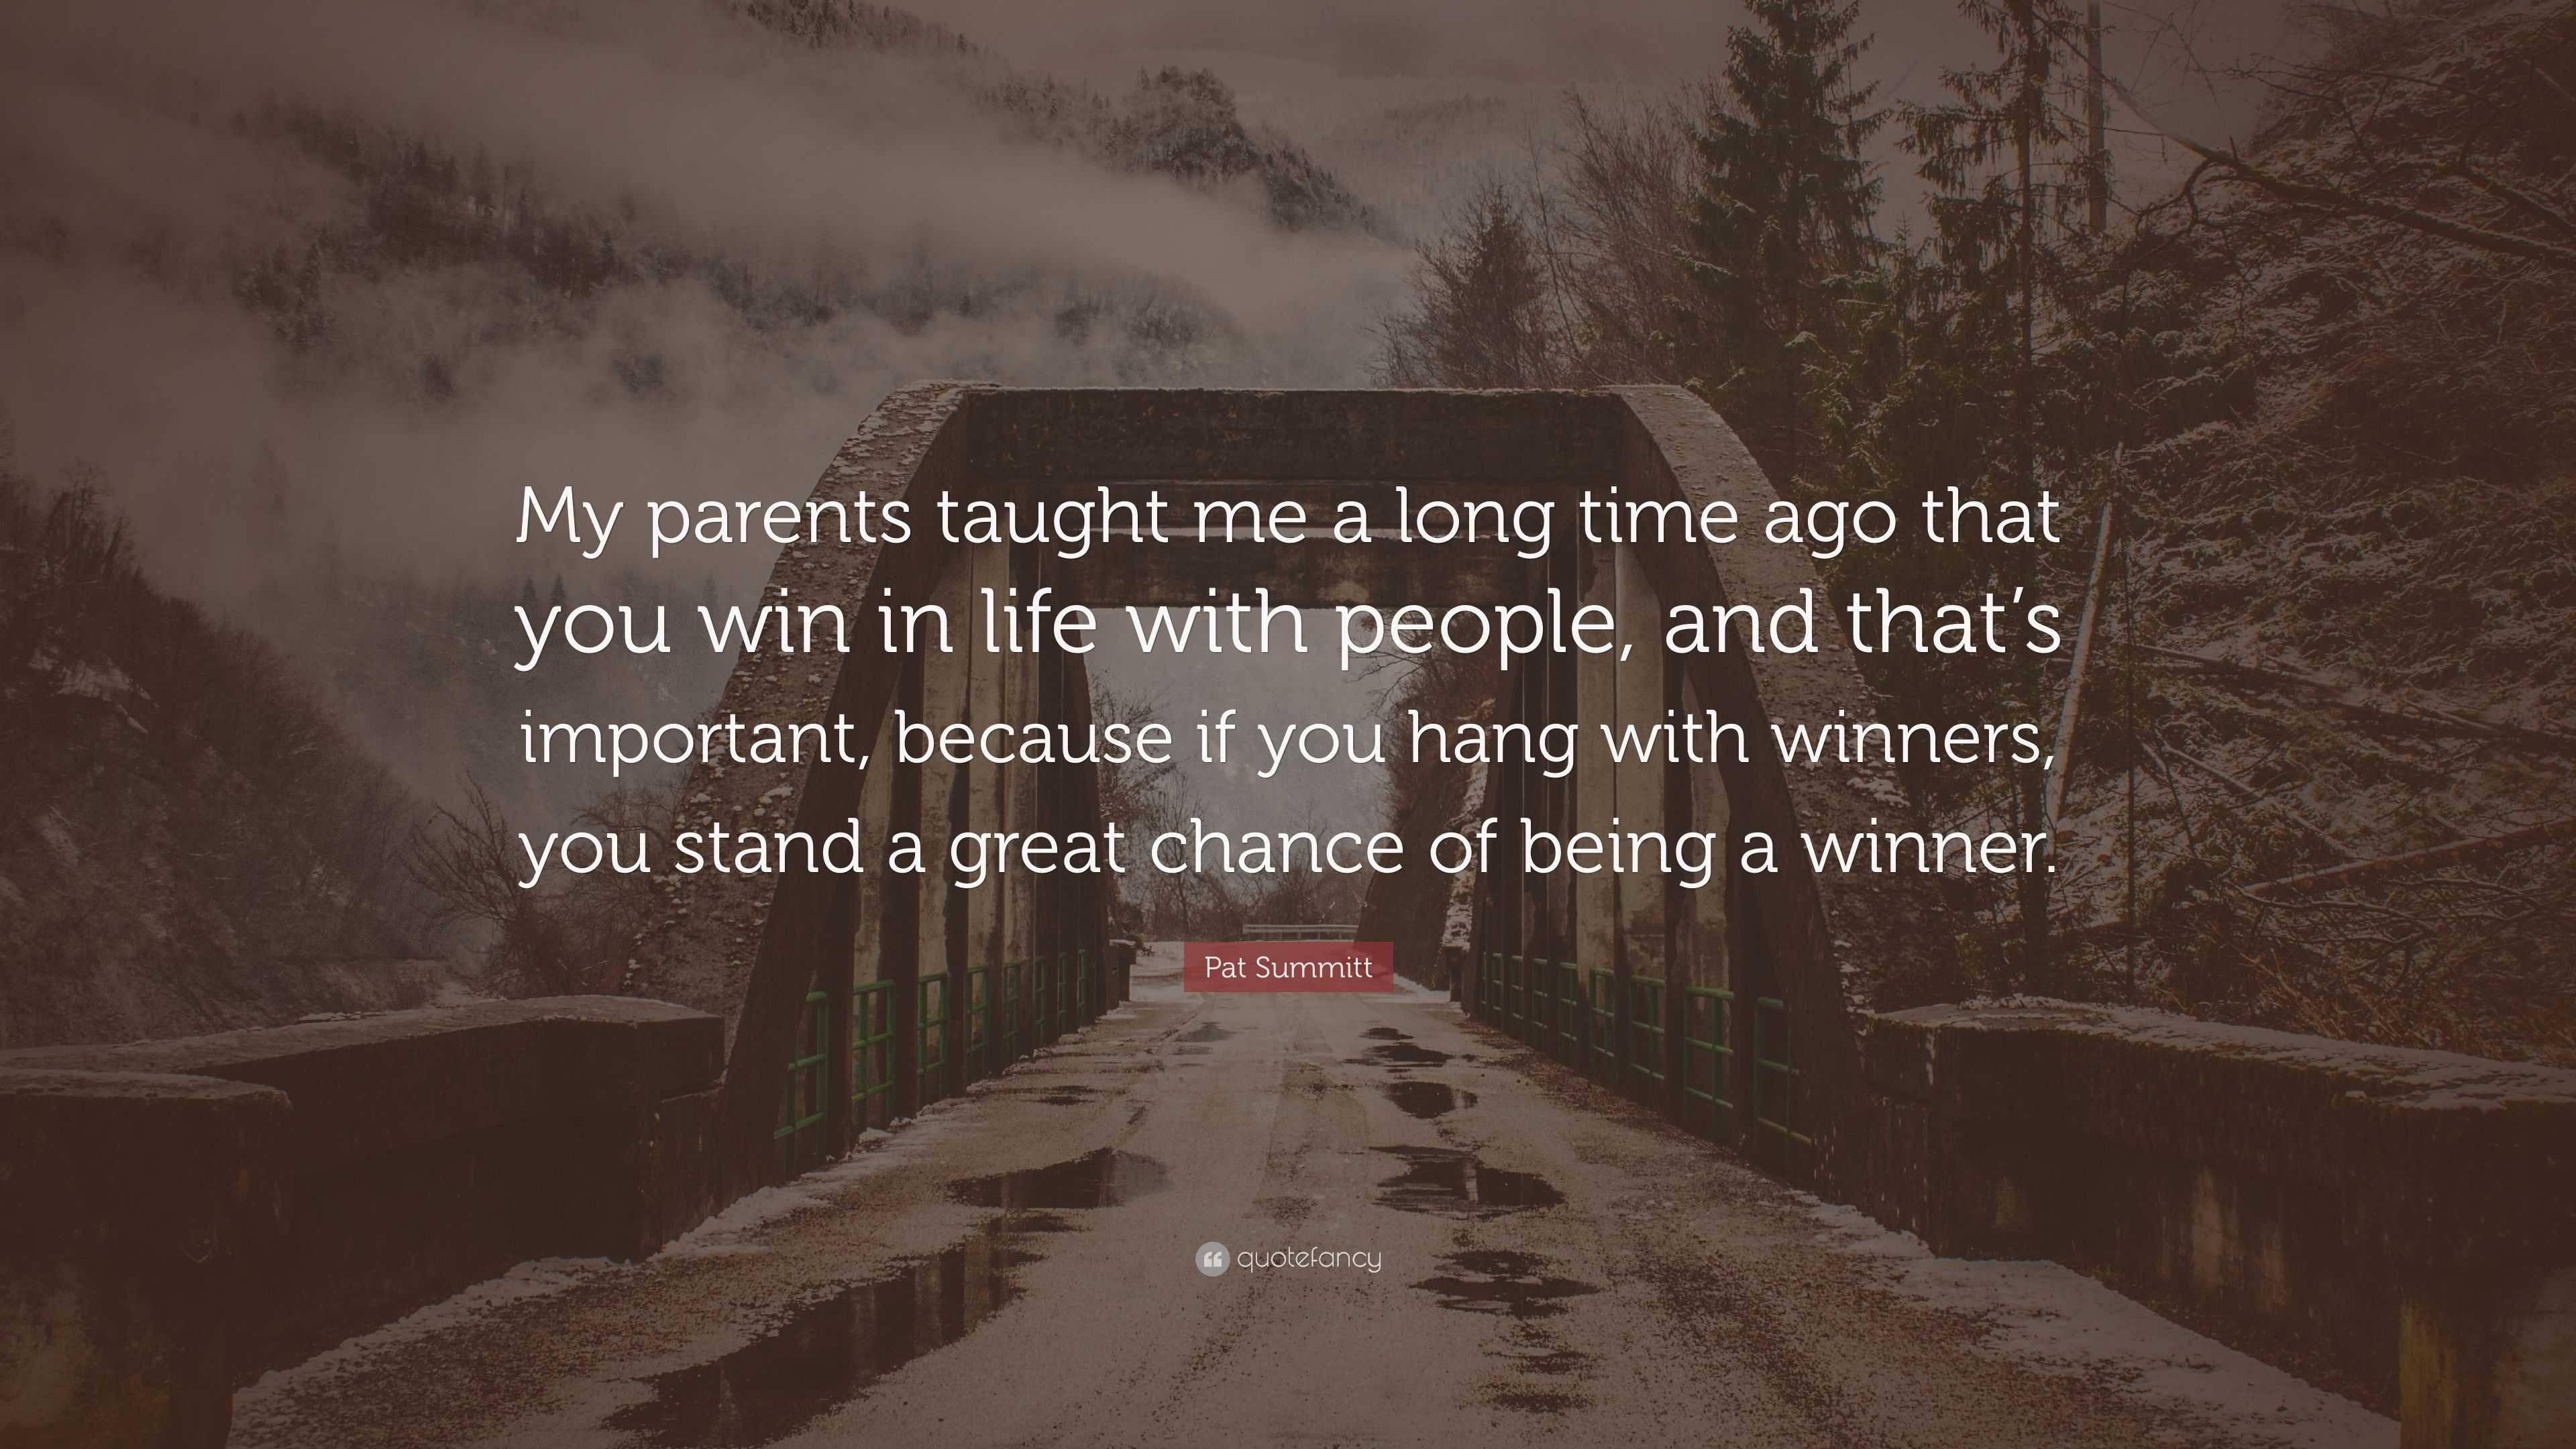 Pat Summitt Quote: “My parents taught me a long time ago that you win